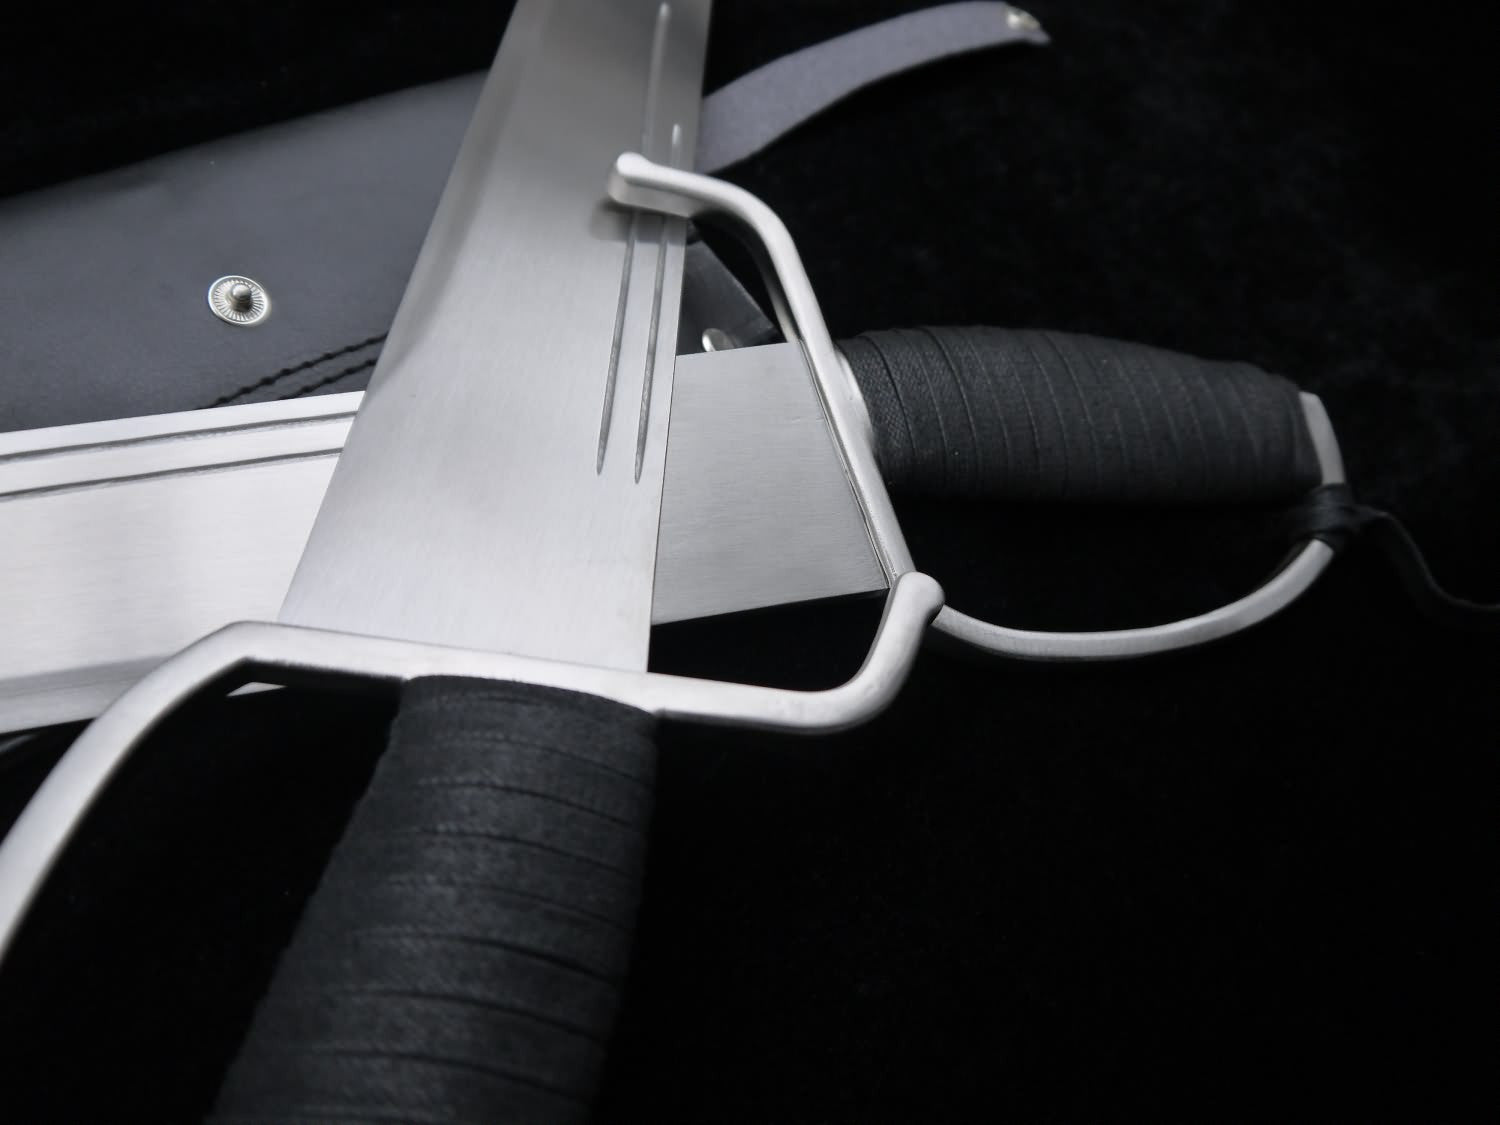 Wing Chun Bart Cham Dao,Yewen double knives,Stainless steel blade and handguard - Chinese sword shop